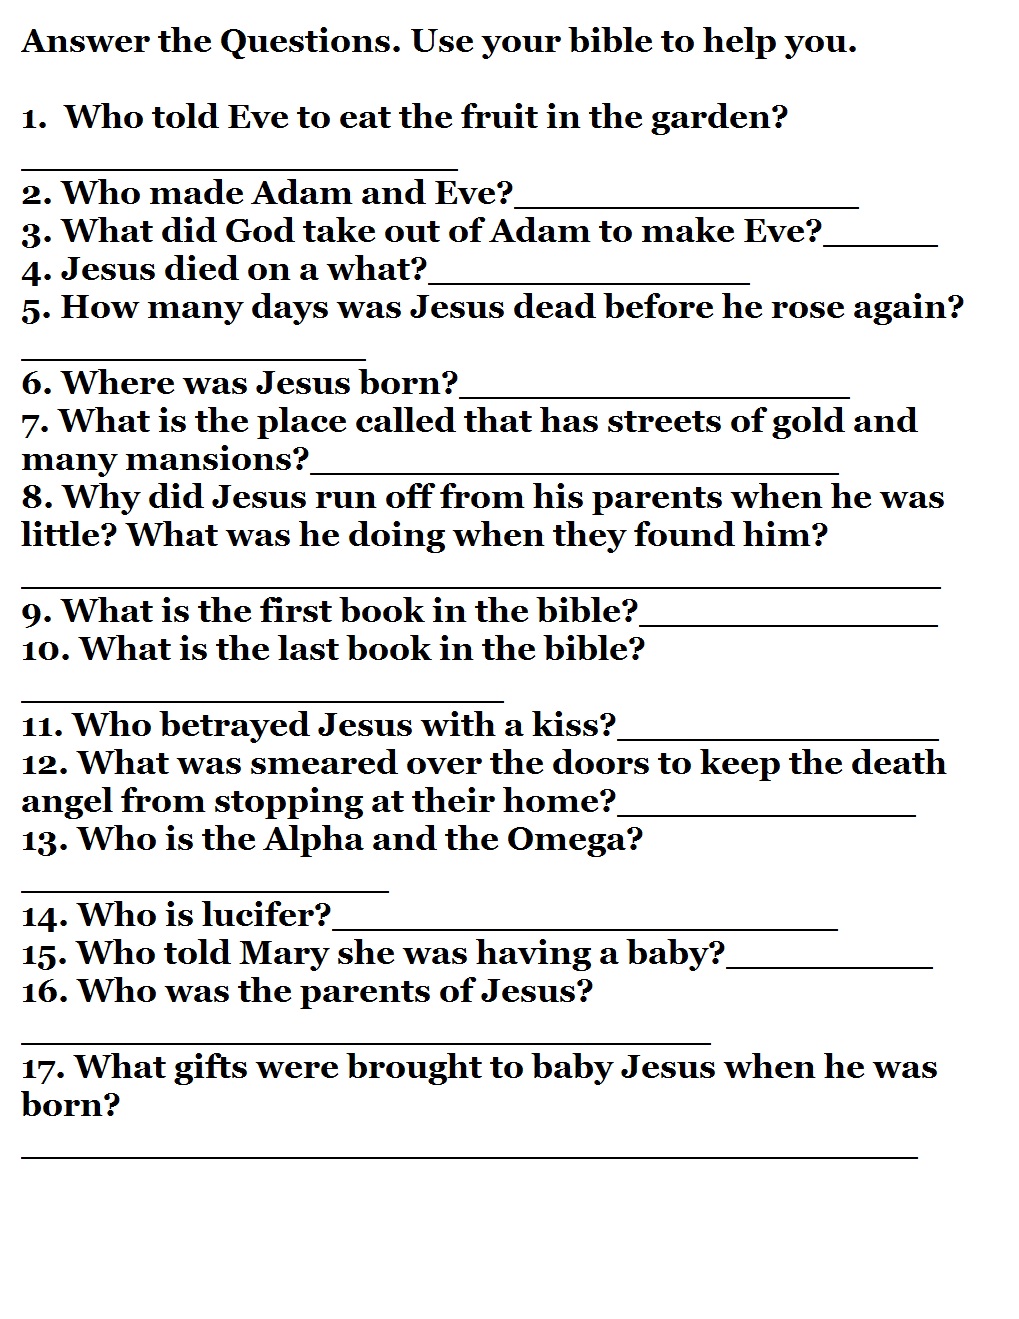 free-printable-bible-quizzes-with-answers-sitevisions